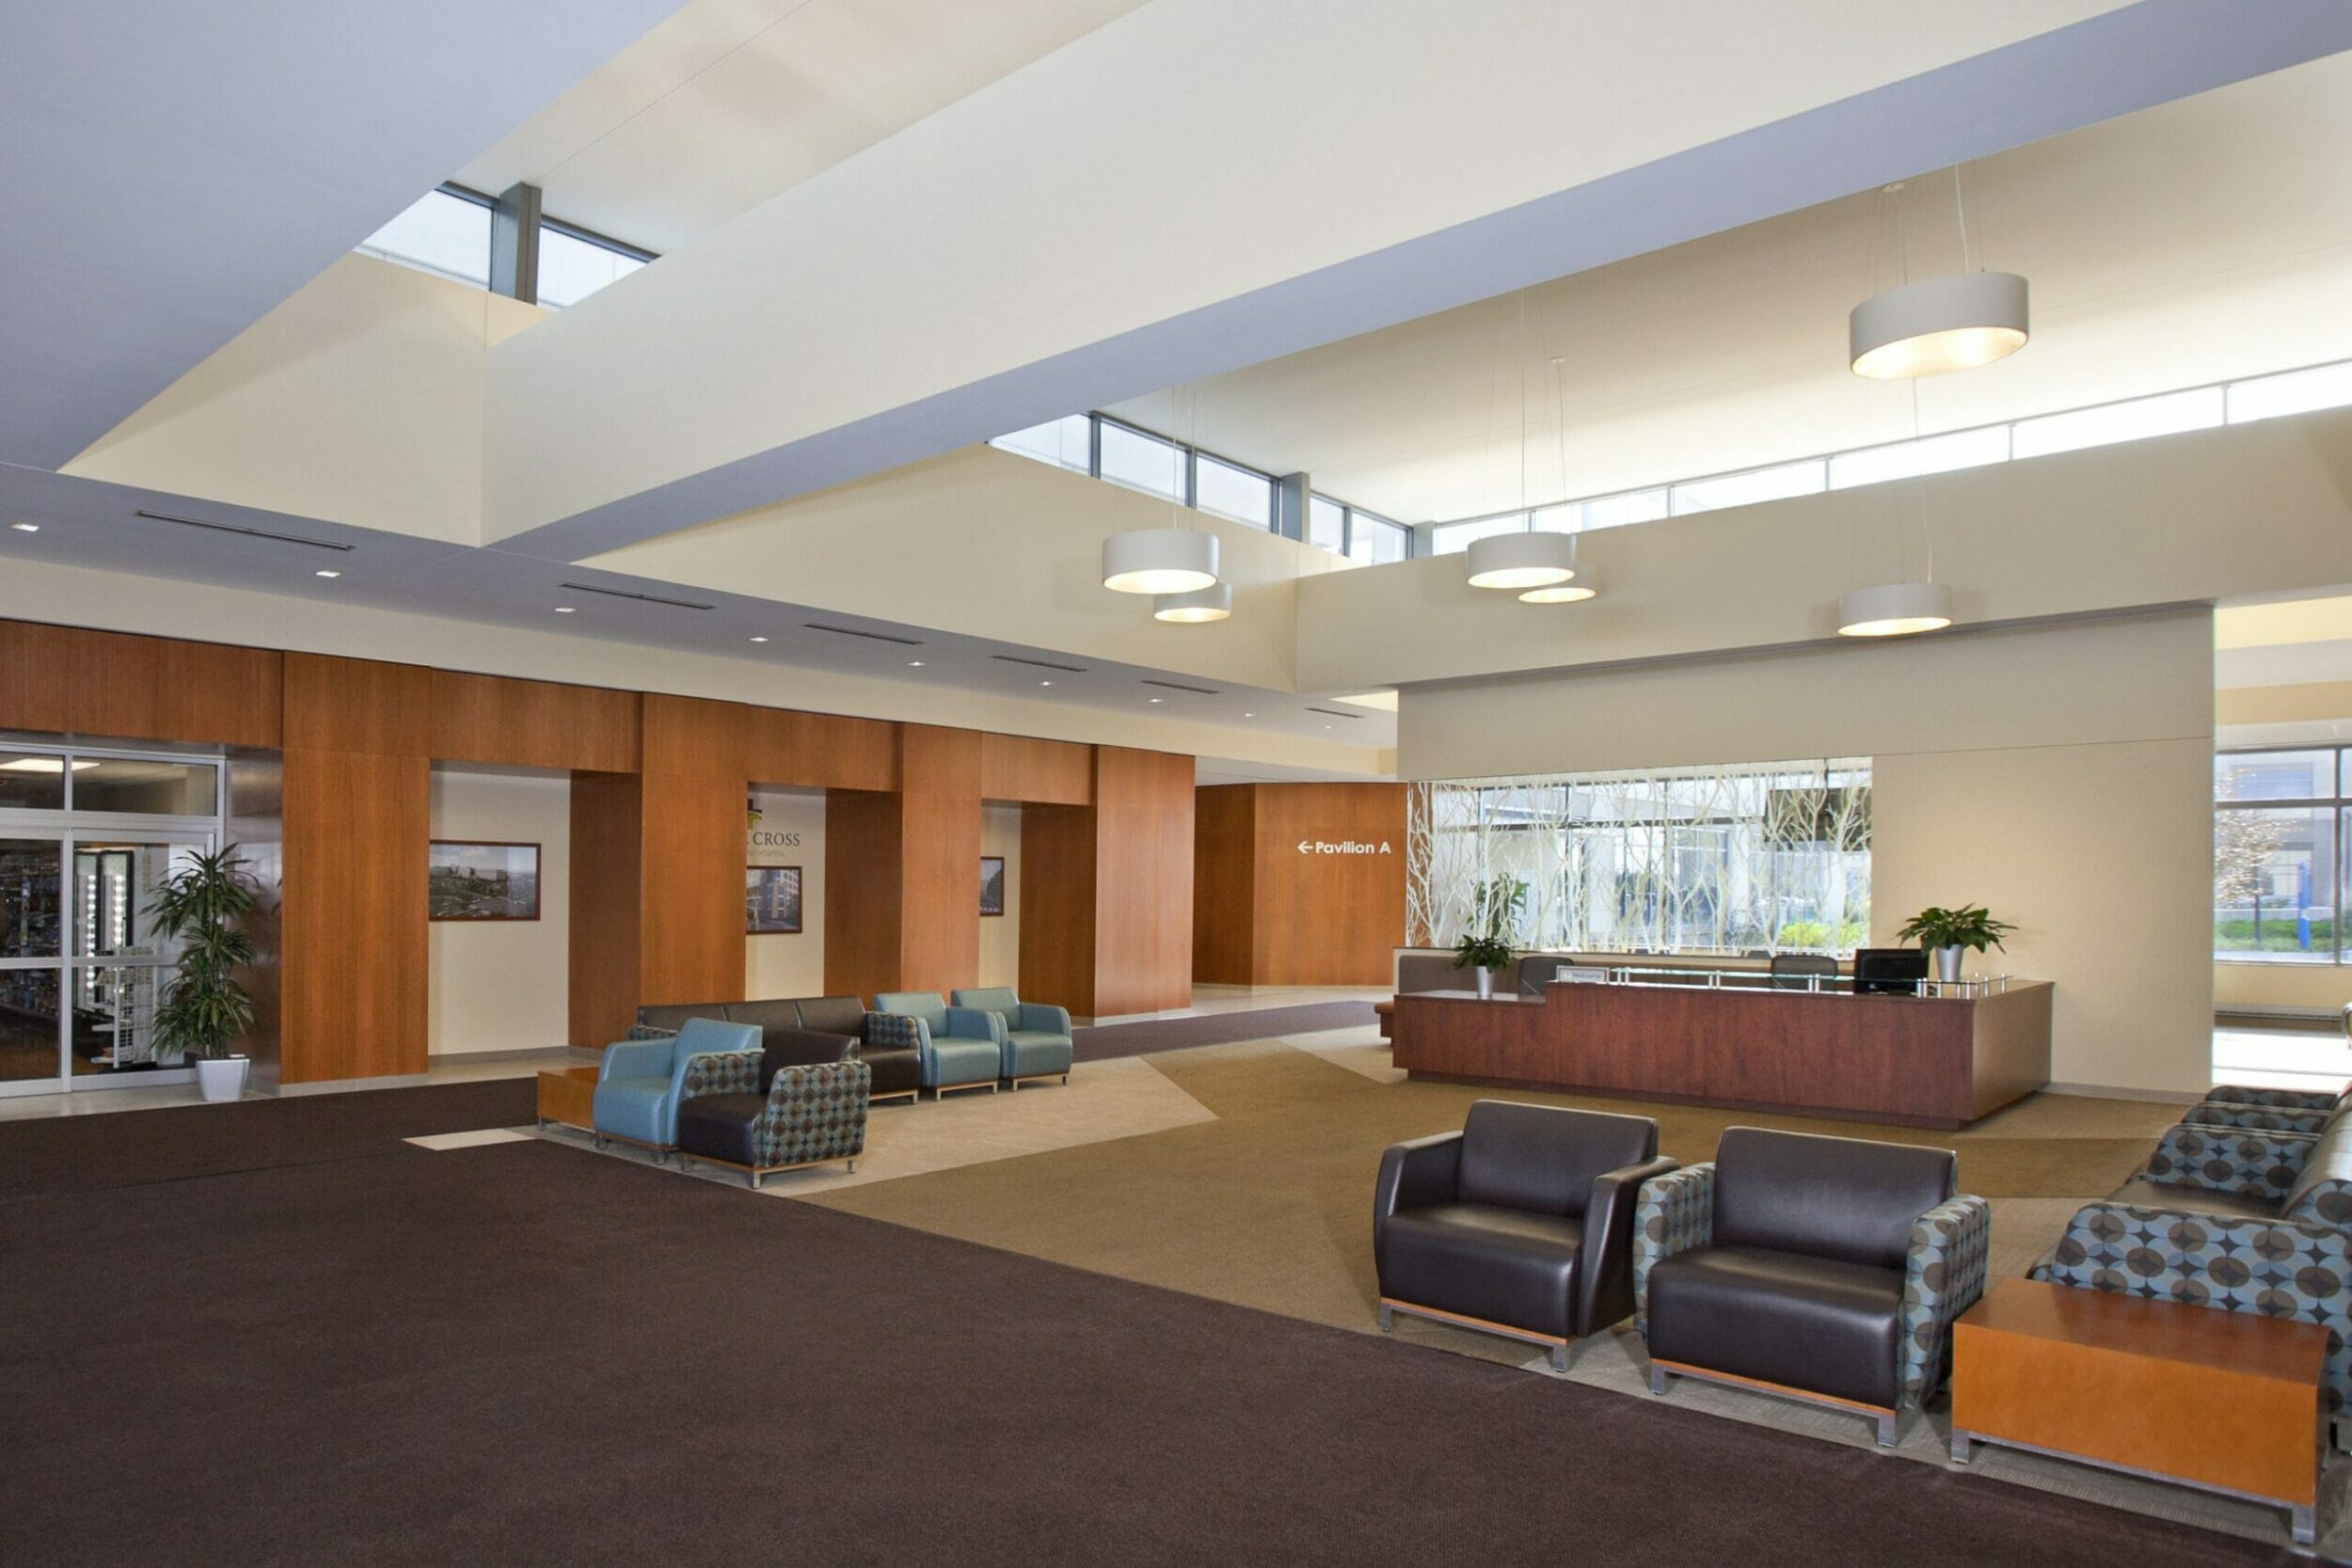 Main lobby at silver cross, leather couch and chairs, check in desk, Walgreens pharmacy entrance